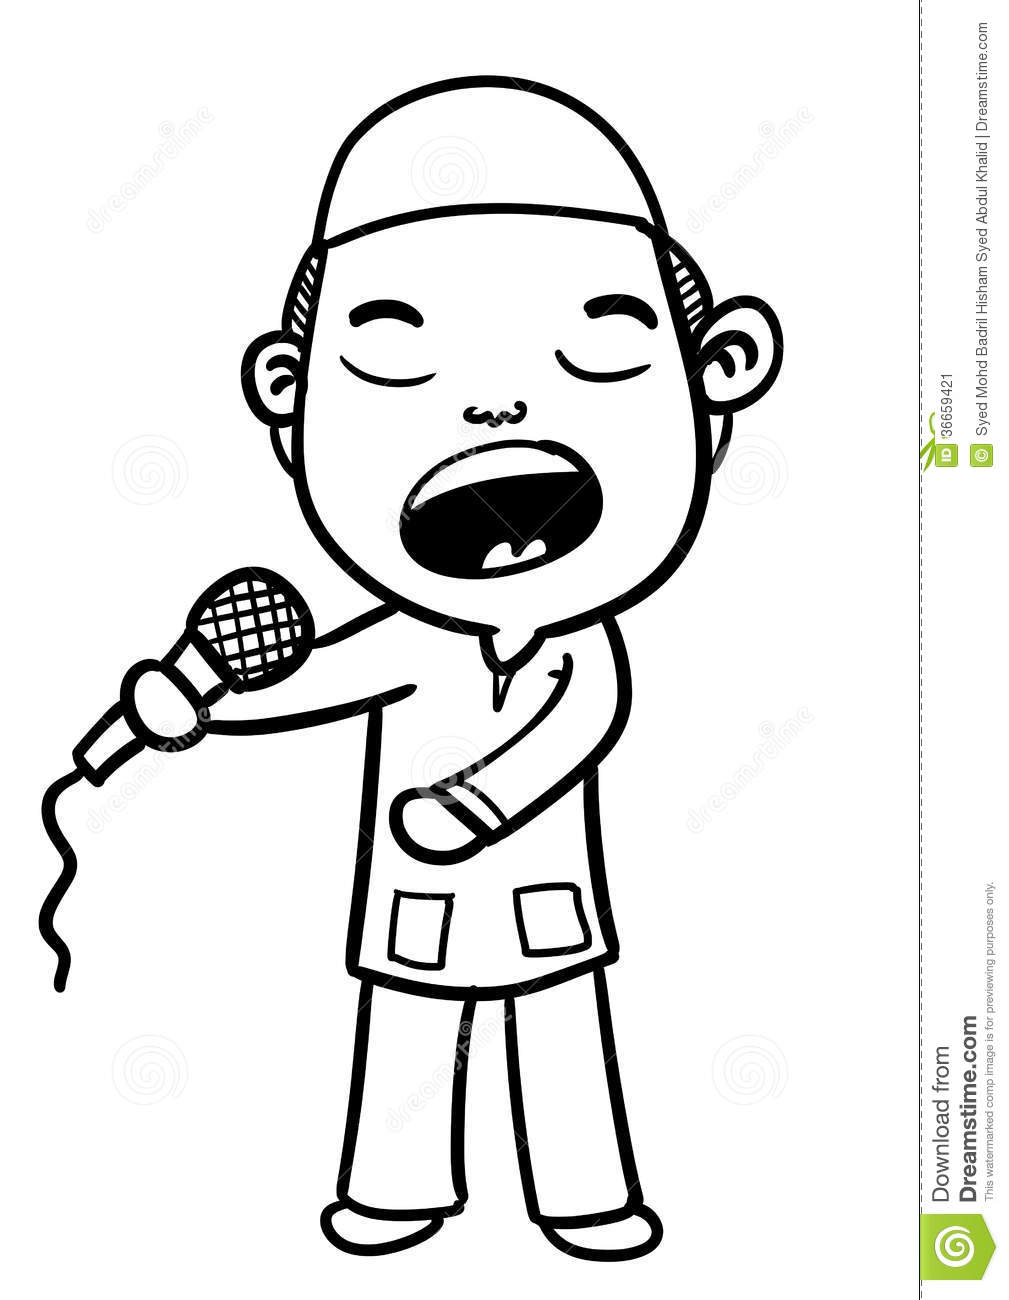 Sketch Of Boy Singing With Passion And Grab The Microphone